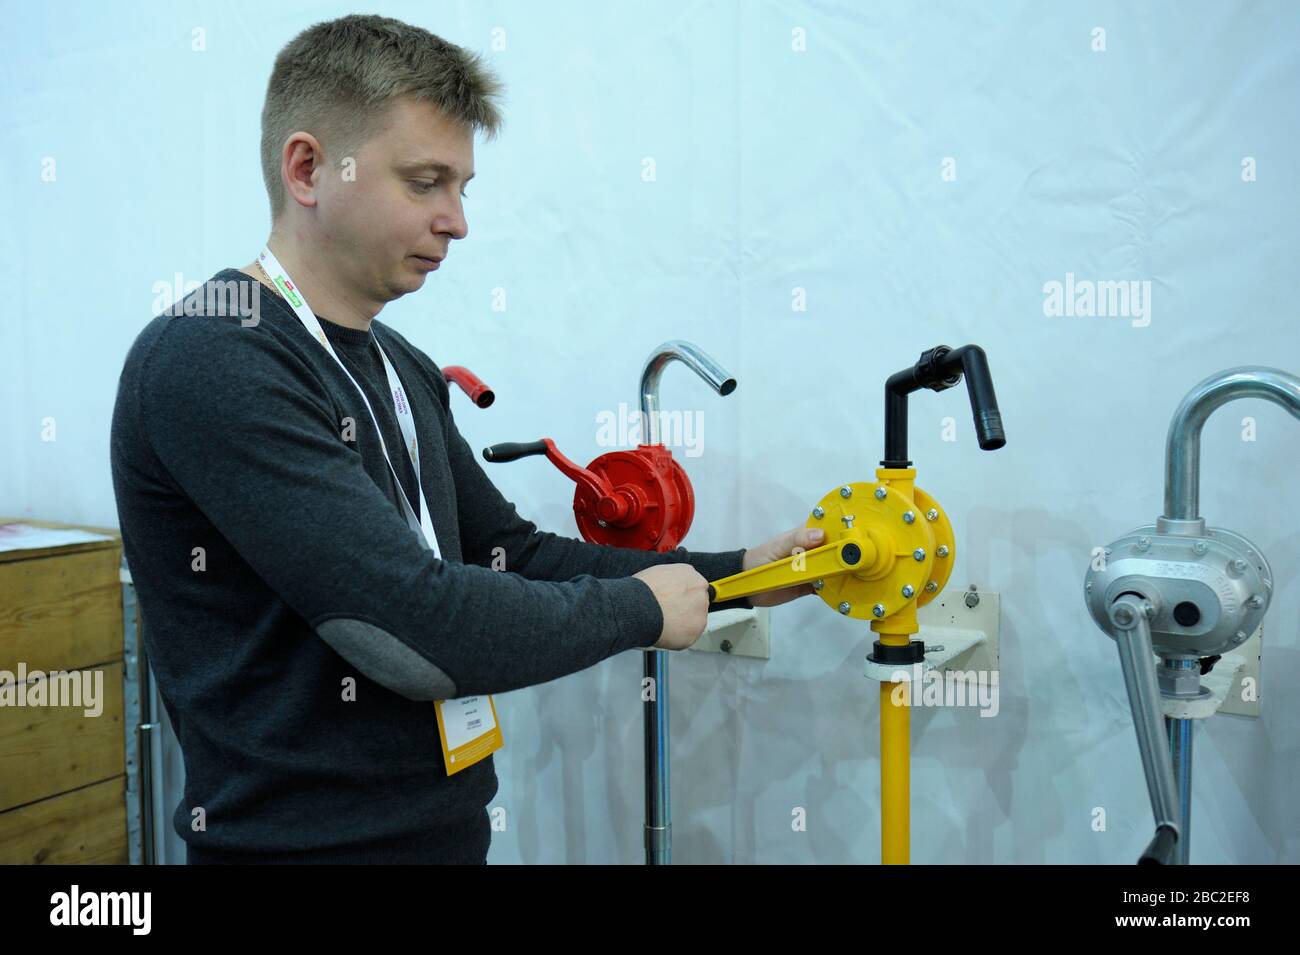 Sales manager shows Rotary hand pumps placed on stand Stock Photo